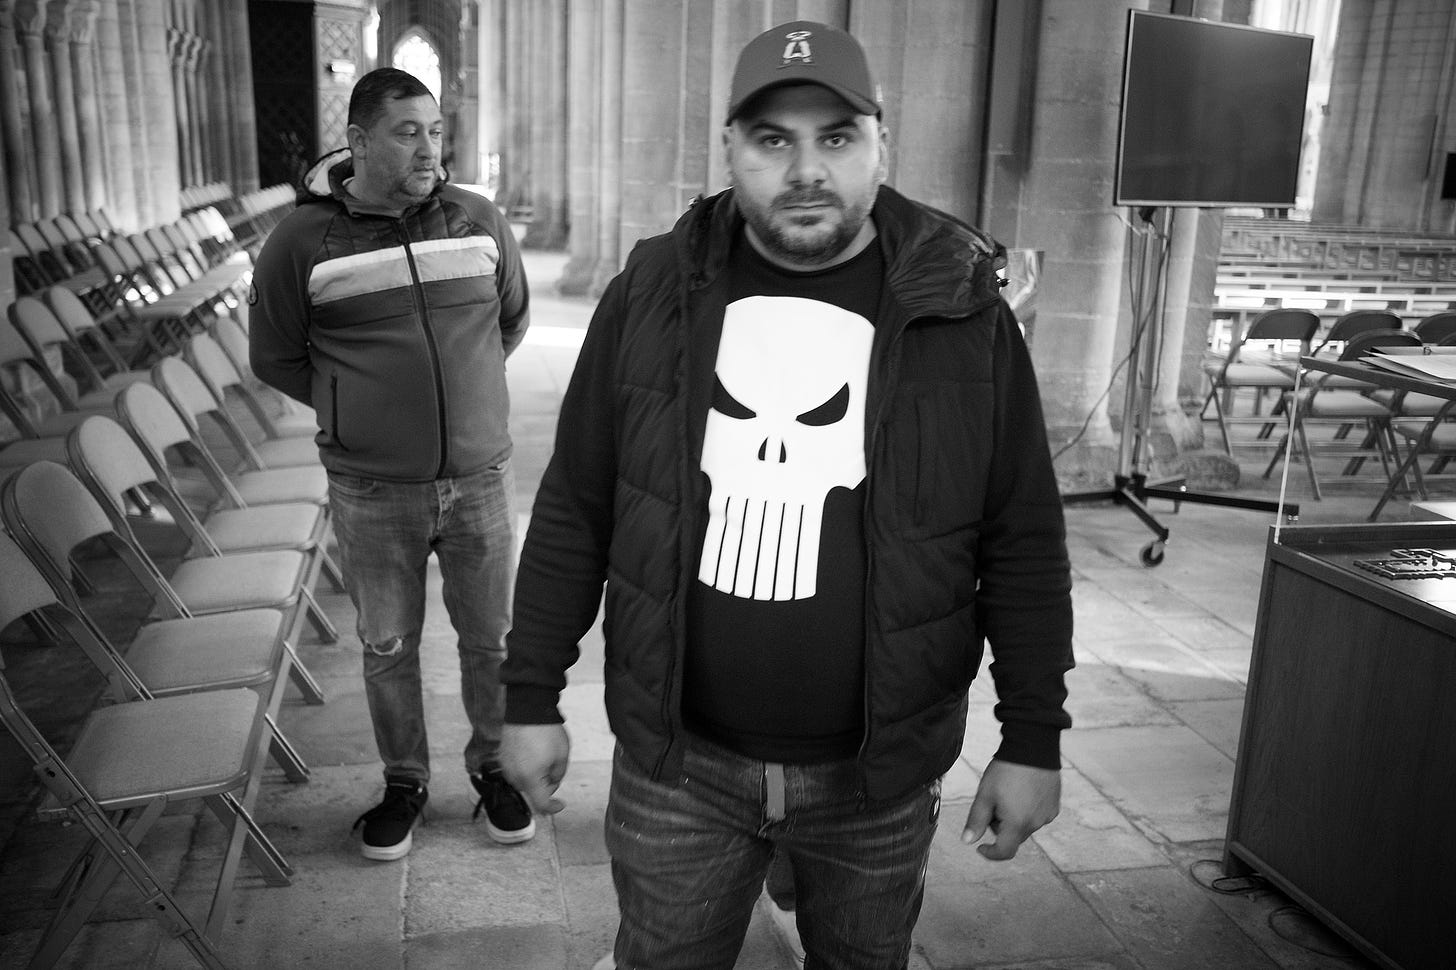 two men standing in Ely cathedral. One is wearing a punisher t-shirt. Black and white photo.